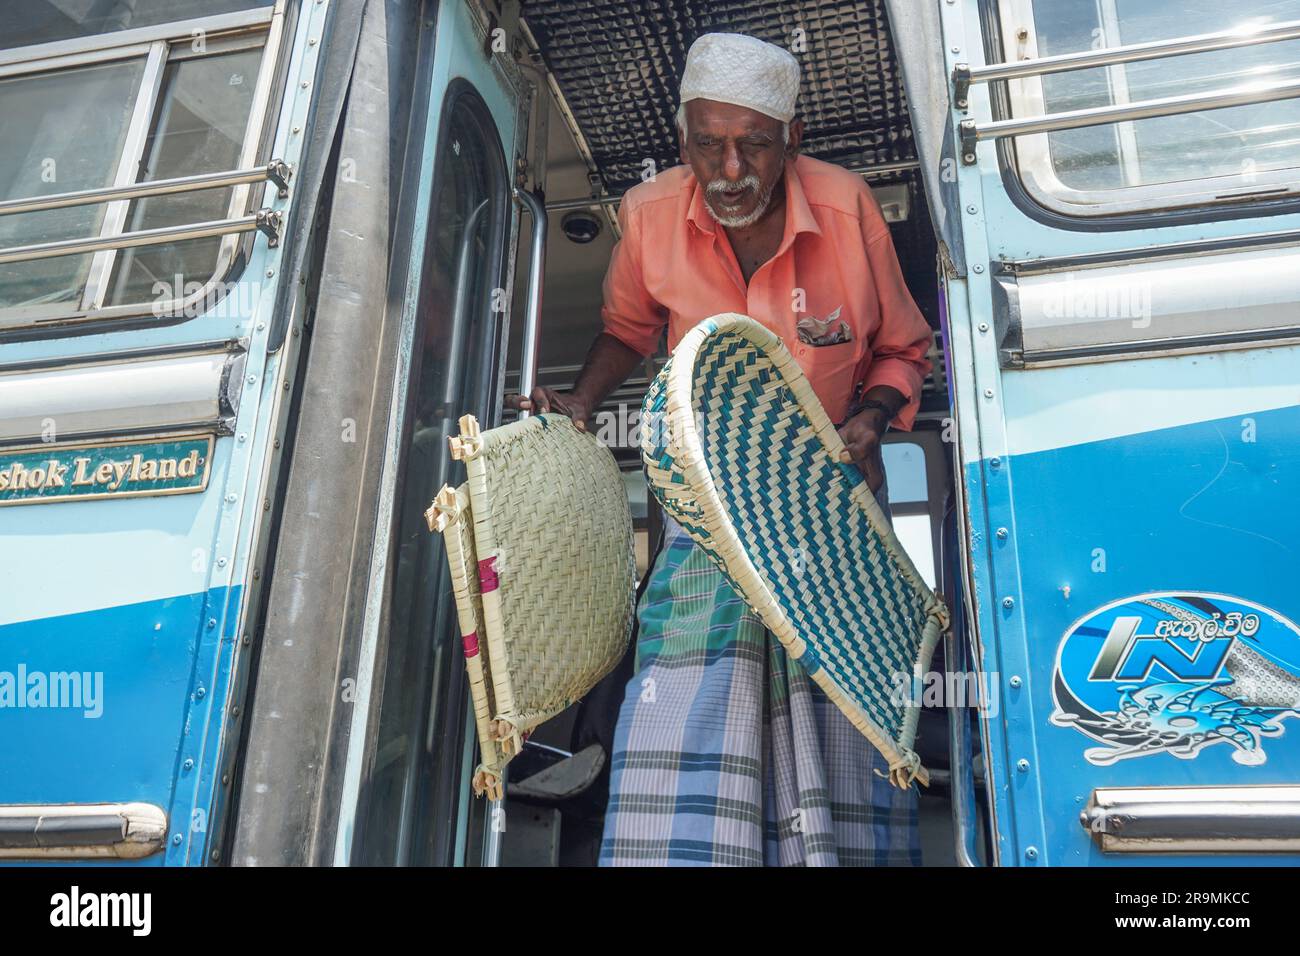 Mohitheen Lamalipu carries winnowing fans off a bus in Mannar, Sri Lanka on March 23, 2023. Every morning, Lamalipu comes to a city bus station, where he boards every bus ready to depart to sell baskets to passengers. (Vetrichelvi Chandrakala/Global Press Journal) Stock Photo